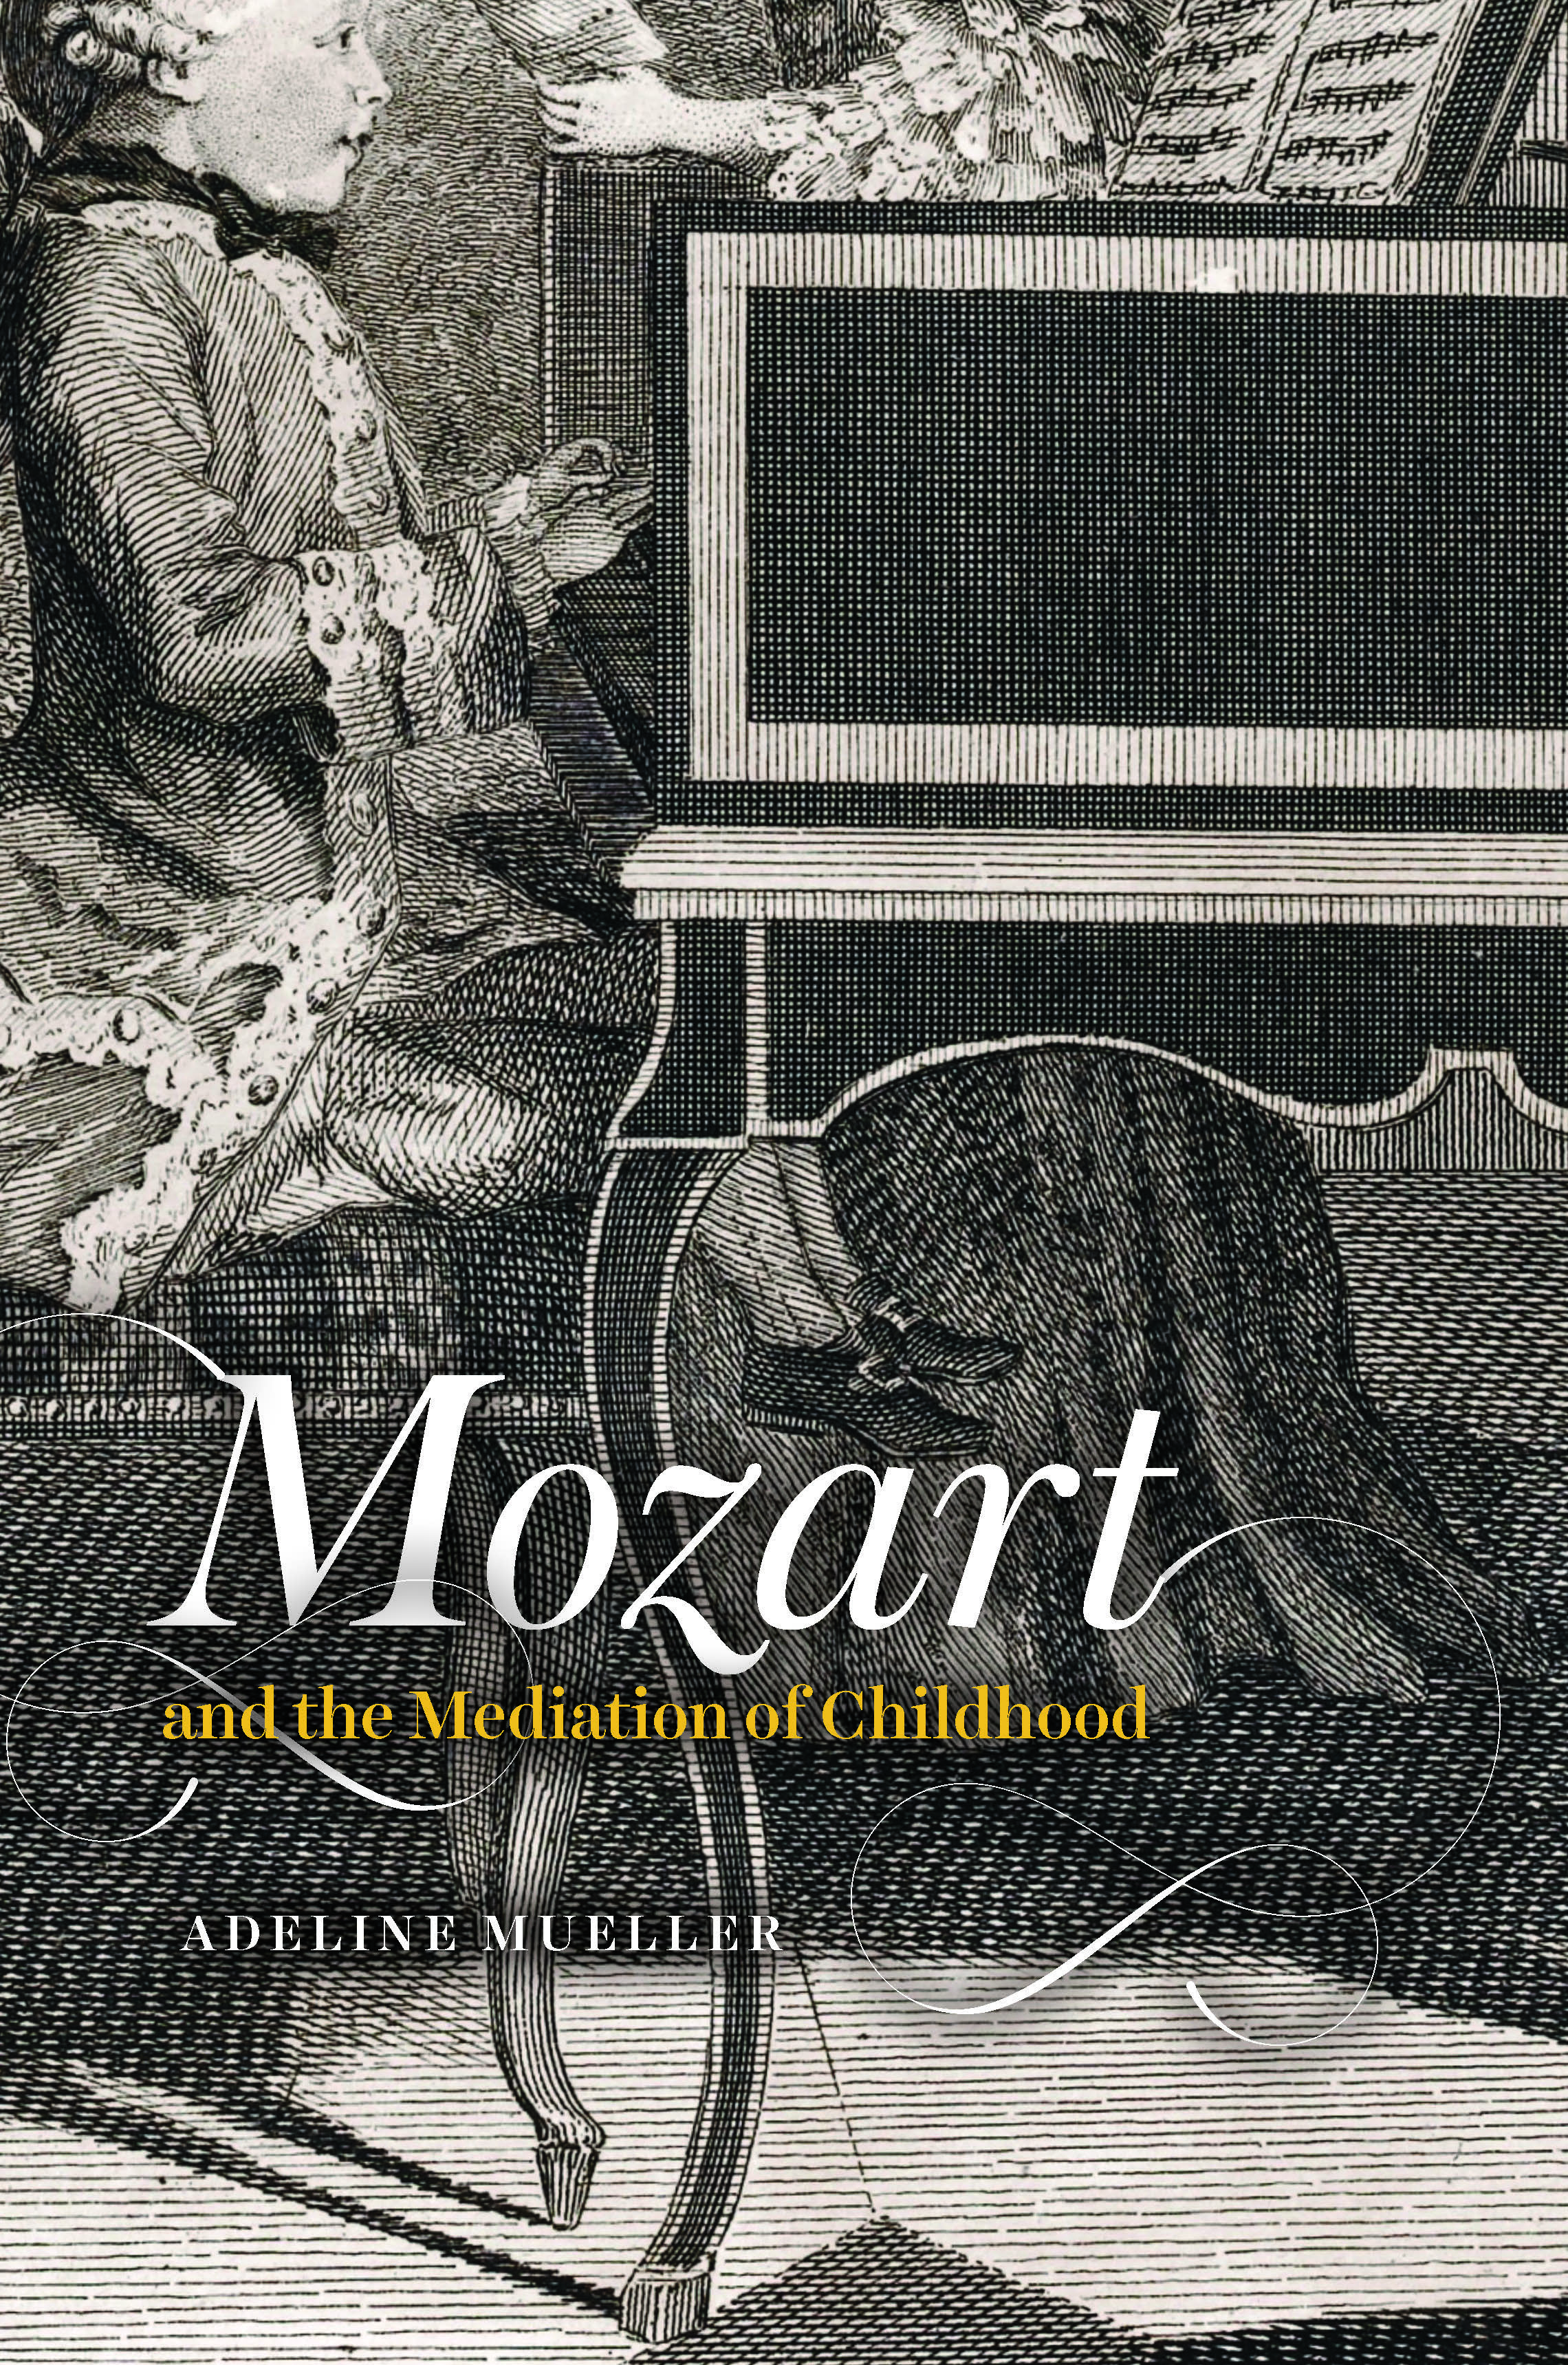 Five Questions with Adeline Mueller, author of “Mozart and the Mediation of Childhood”